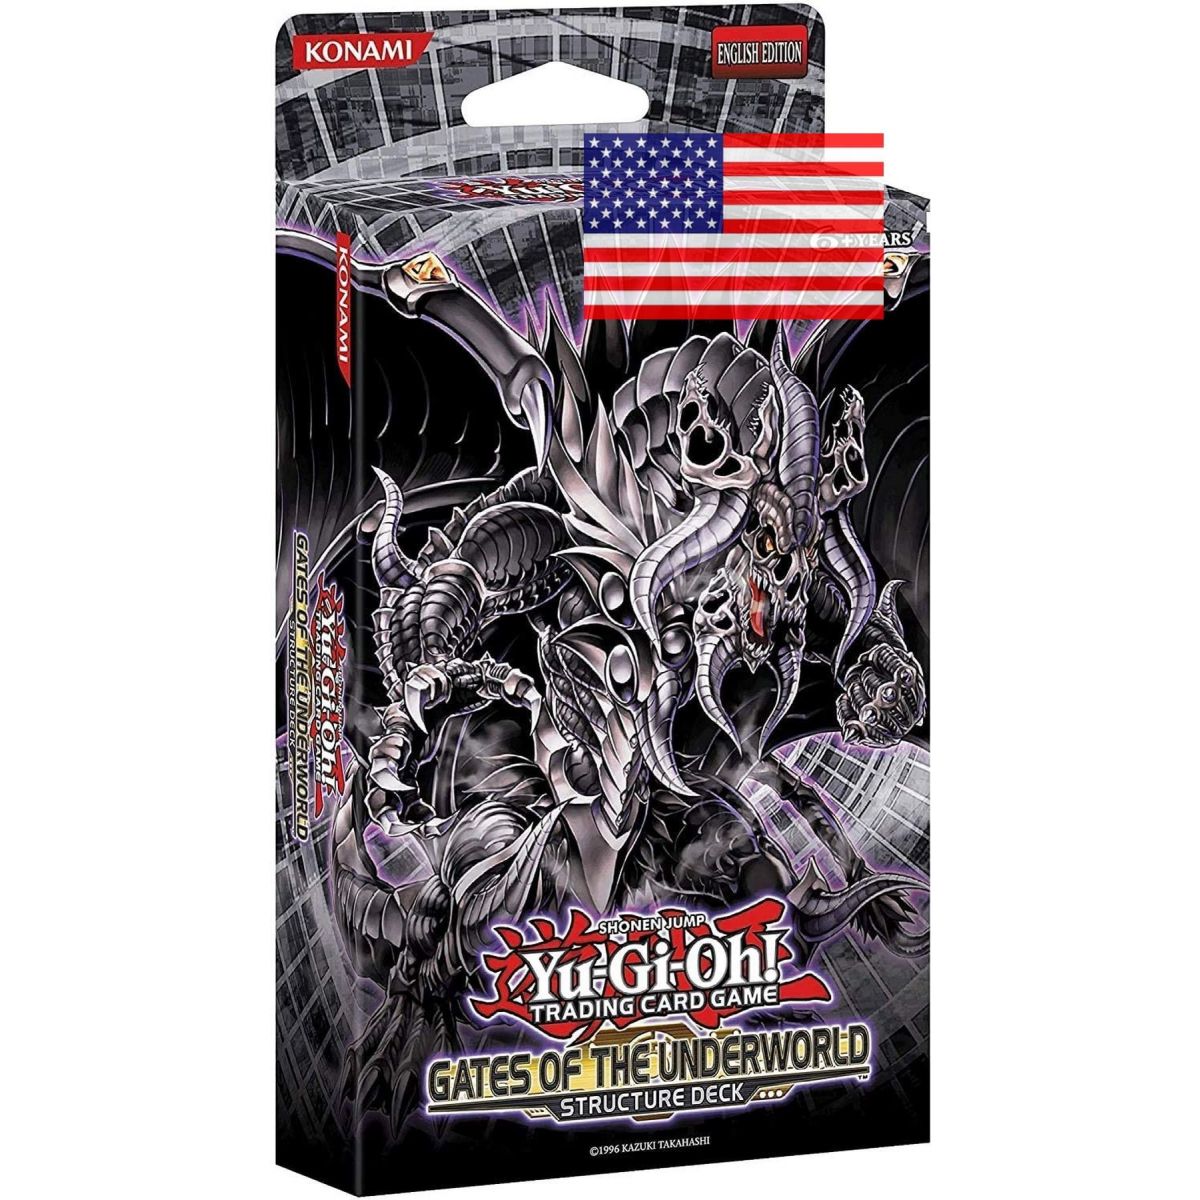 *US Print SEALED* Yu-Gi-Oh! - Structure Deck - Gates of The Underworld - Unlimited